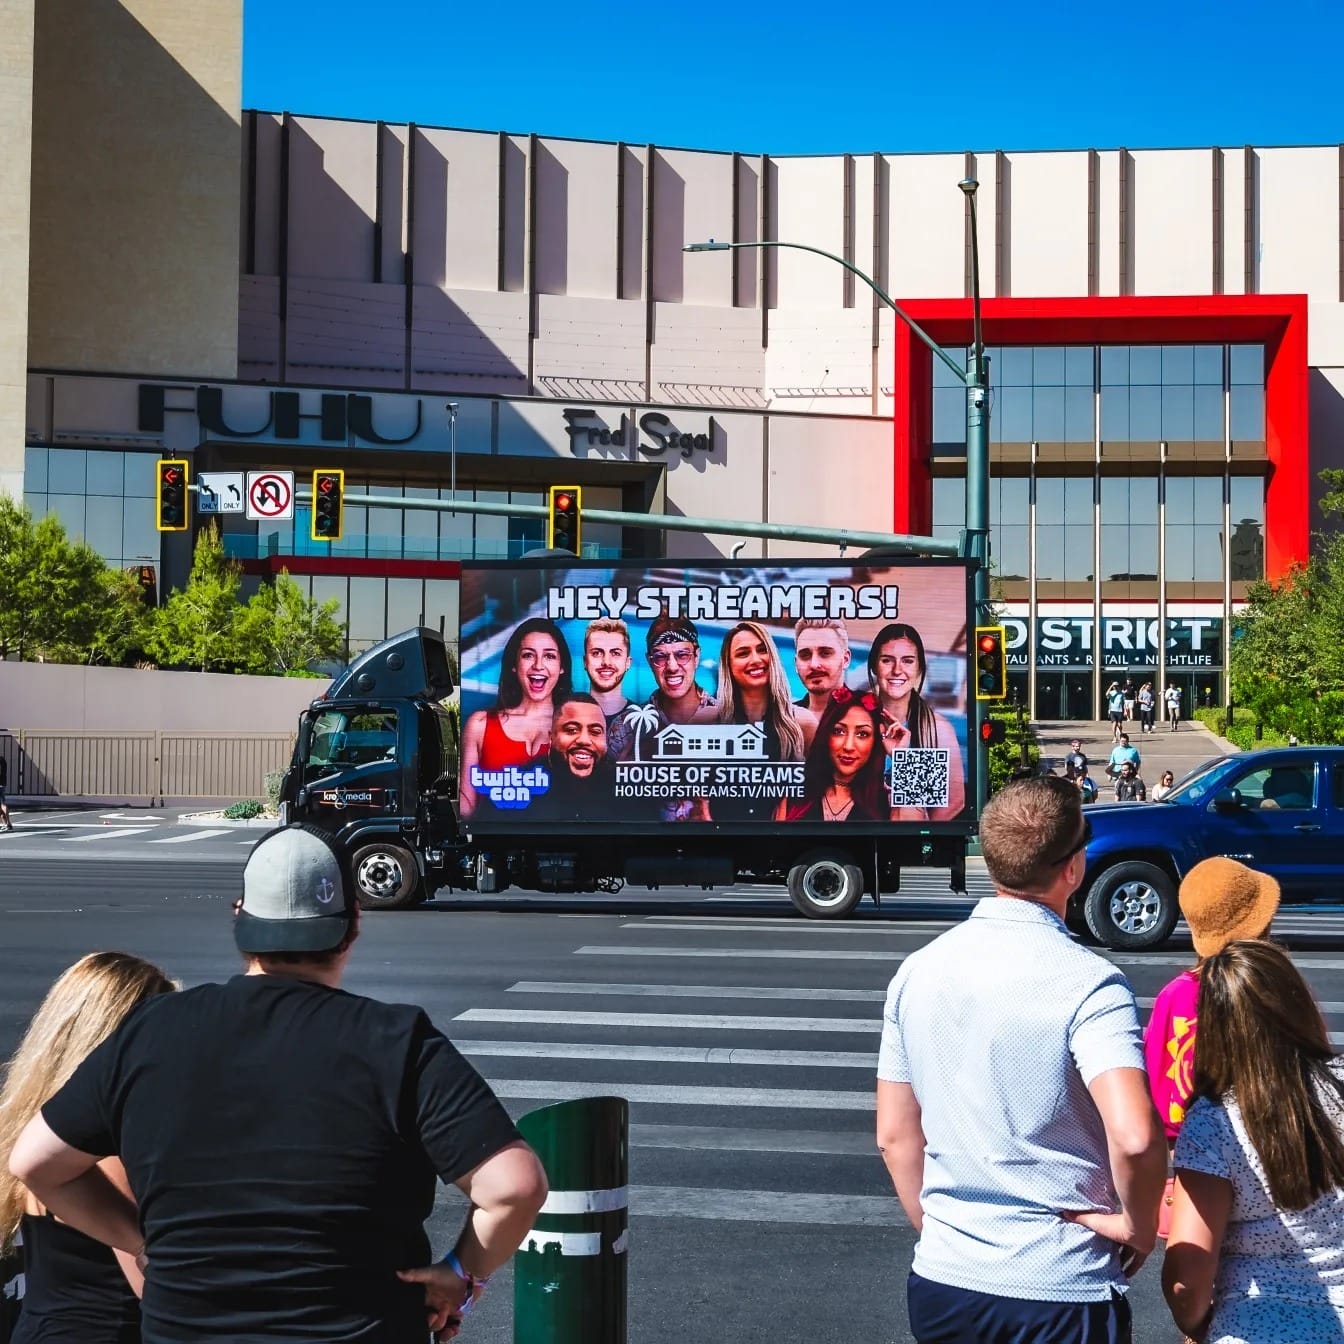 Mobile billboard advertising Twitch Con streams on city street.